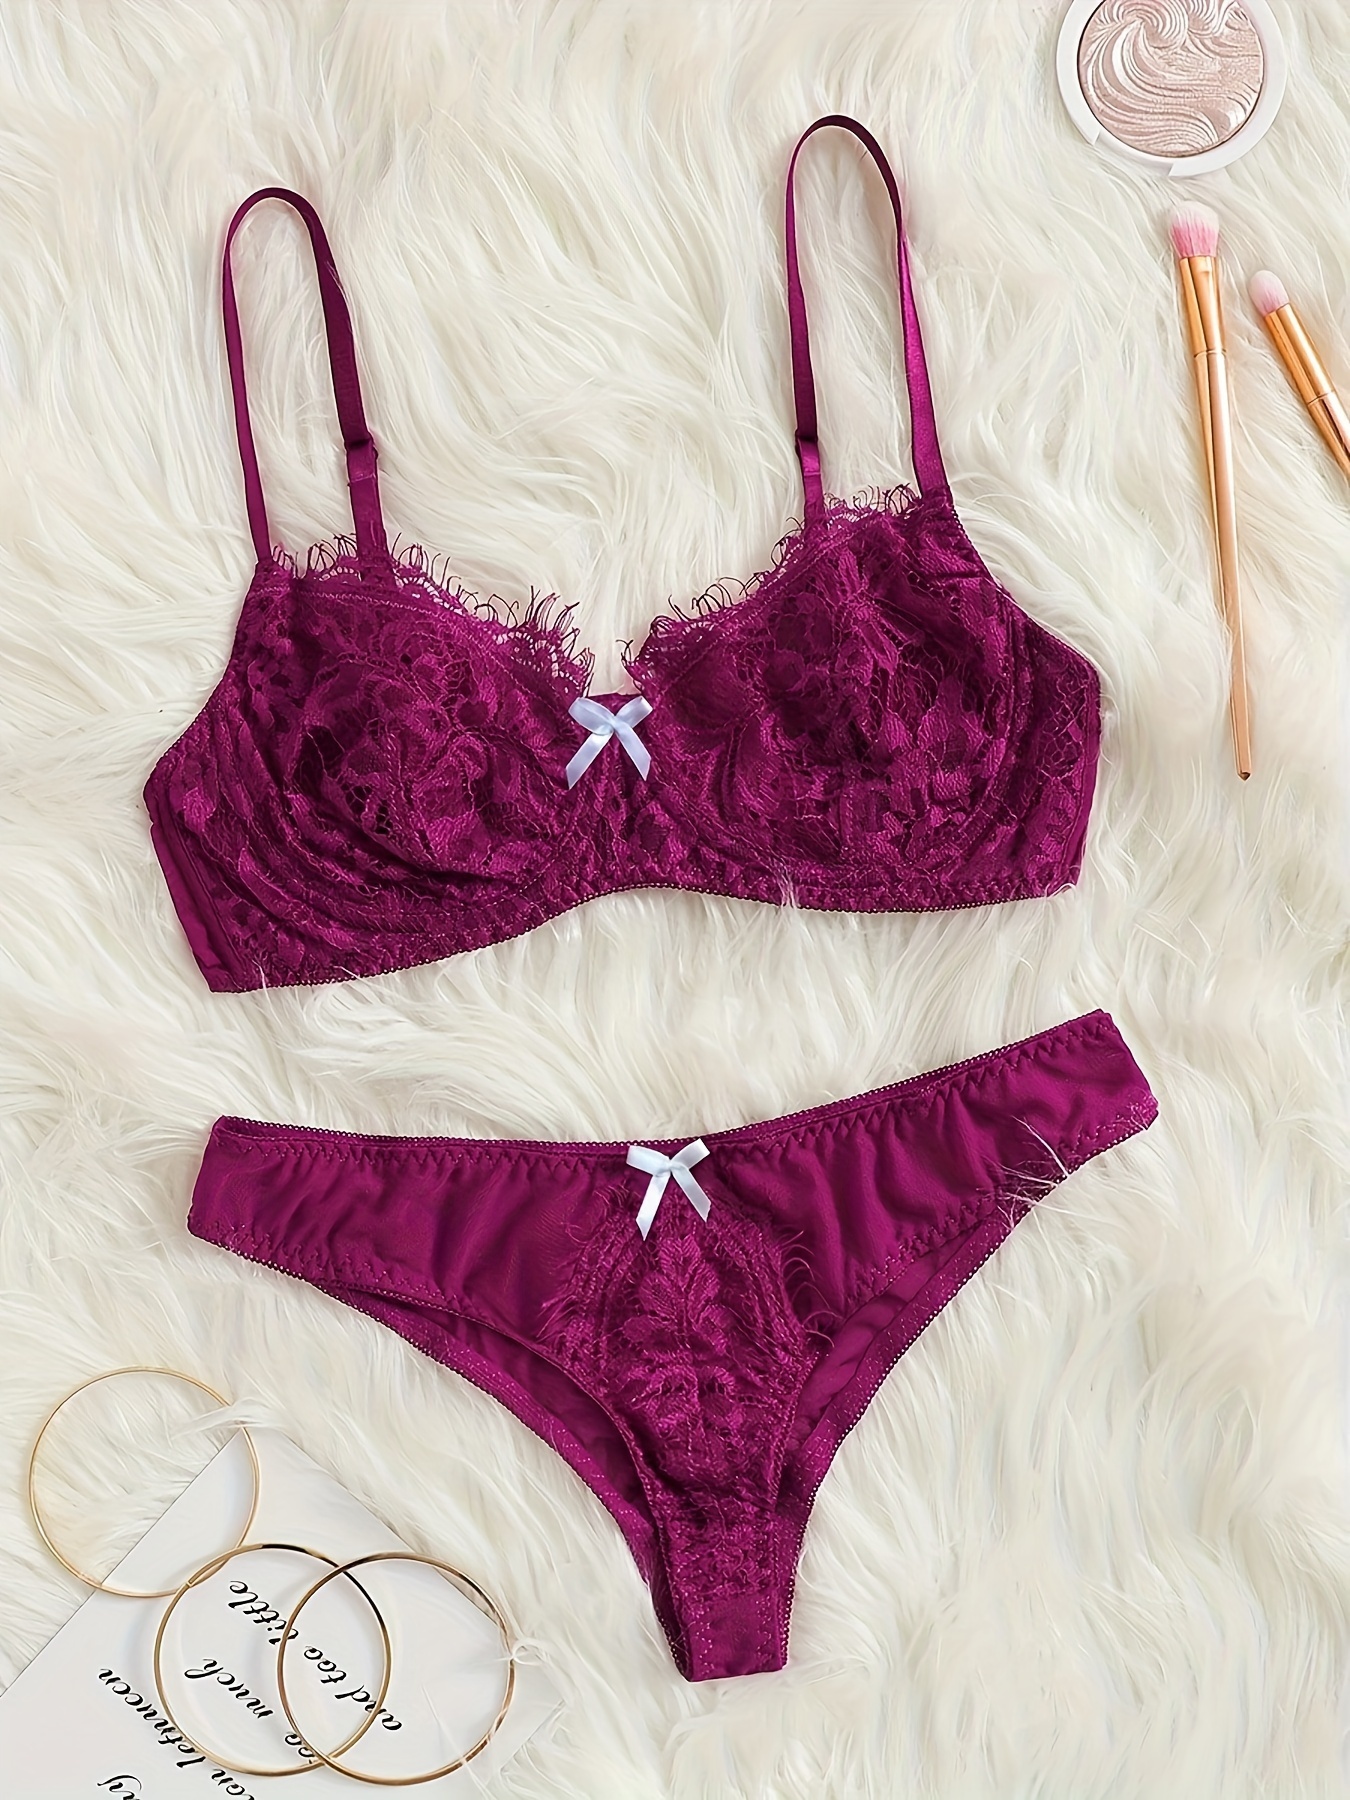 Sexy Lace Lingerie Set with Strappy Bow Bra and Cheeky Panties for Women